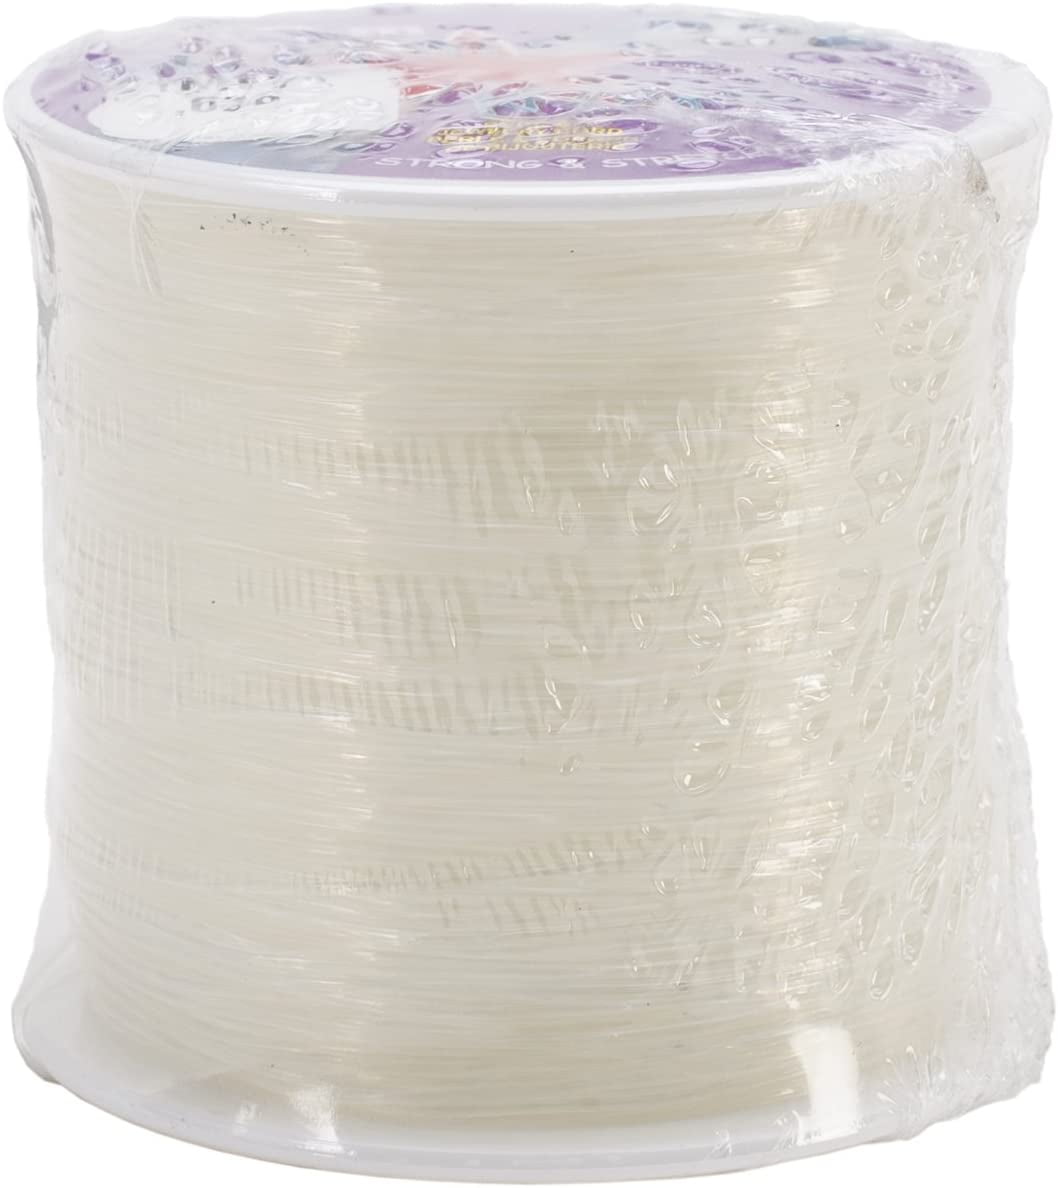  Stretch Magic Bead & Jewelry Cord - Strong & Stretchy, Easy to  Knot - Clear Color - 0.8mm Diameter - 100-meter (328 ft) Spool - Elastic  String for Making Beaded Jewelry